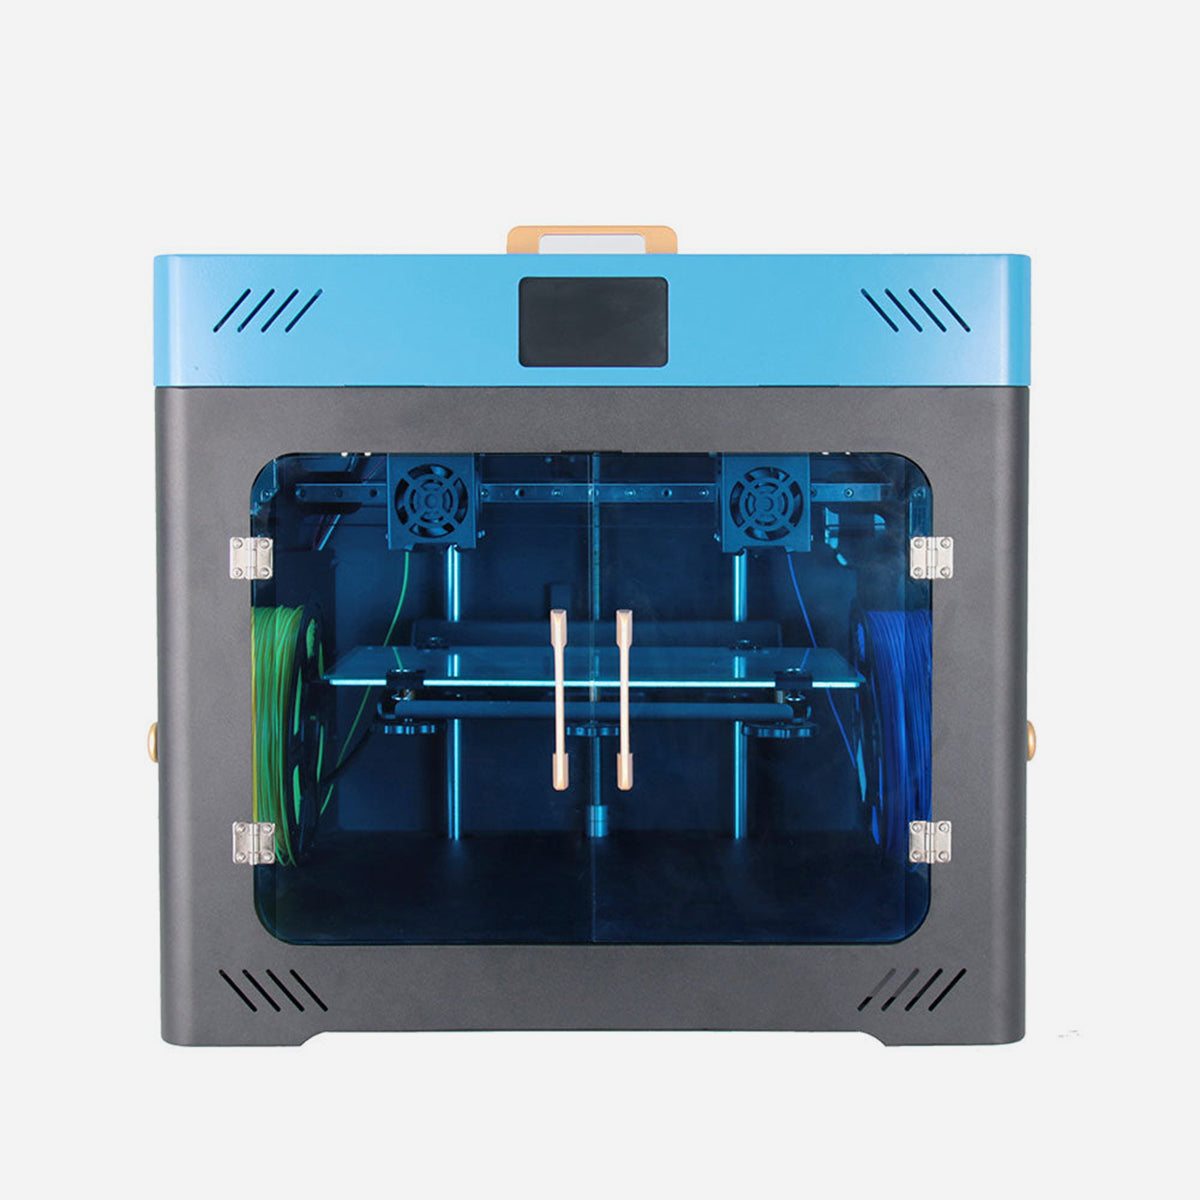 TENLOG TL M3 V2 independent dual extruder 3D printer, all in one machine without installation, 300 degree high temperature nozzle, BMG extruder, 2209 silent motherboard high-speed